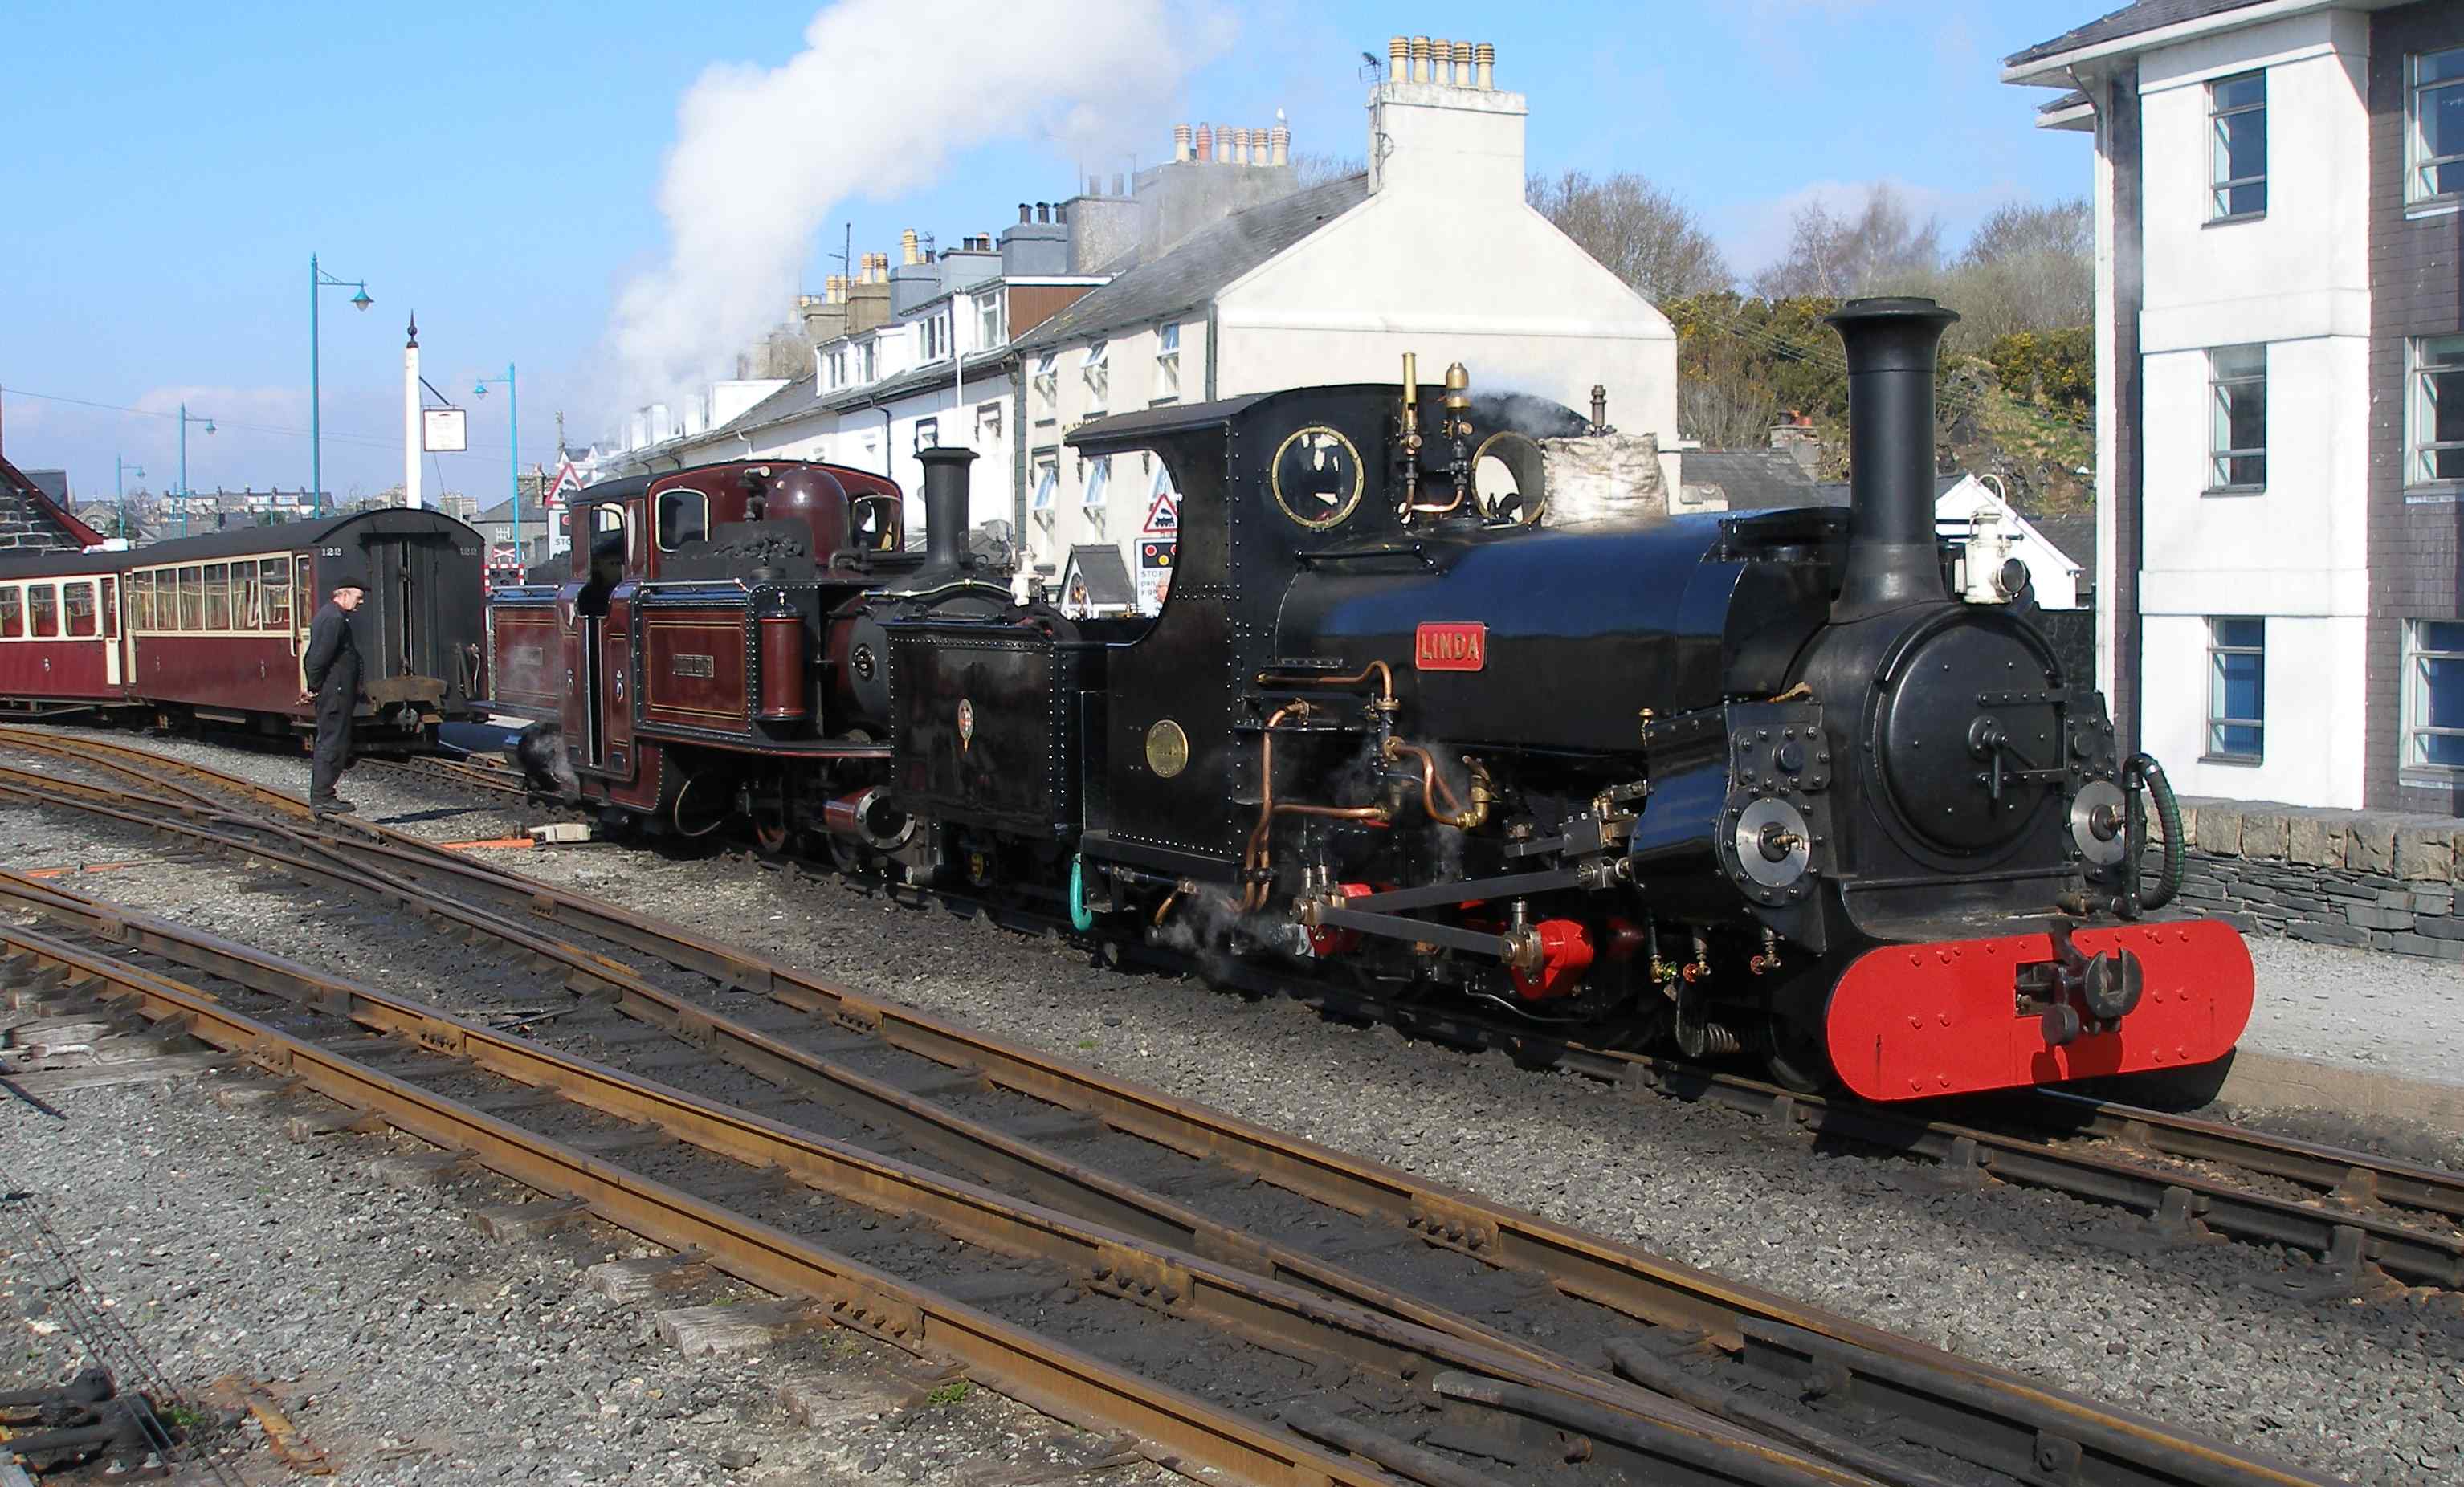 'Linda' and 'Merddin Emrys' make a fine sight as they back down on to their train at Porthmadog Harbour Station. This area here is now being redeveloped to create a new platform for Welsh Highland Railway trains to be terminated. This has involved widening the embankment and relocating the wave wall constructed in 1940. The new signal box and relay room are now located behind and to the left of the photographer. The new scheme will feature lower quadrant semaphore signals and the restoration of a 'trident' - the original was brought down from Blaenau in 1923 but was finally blown down in the late 1960s.